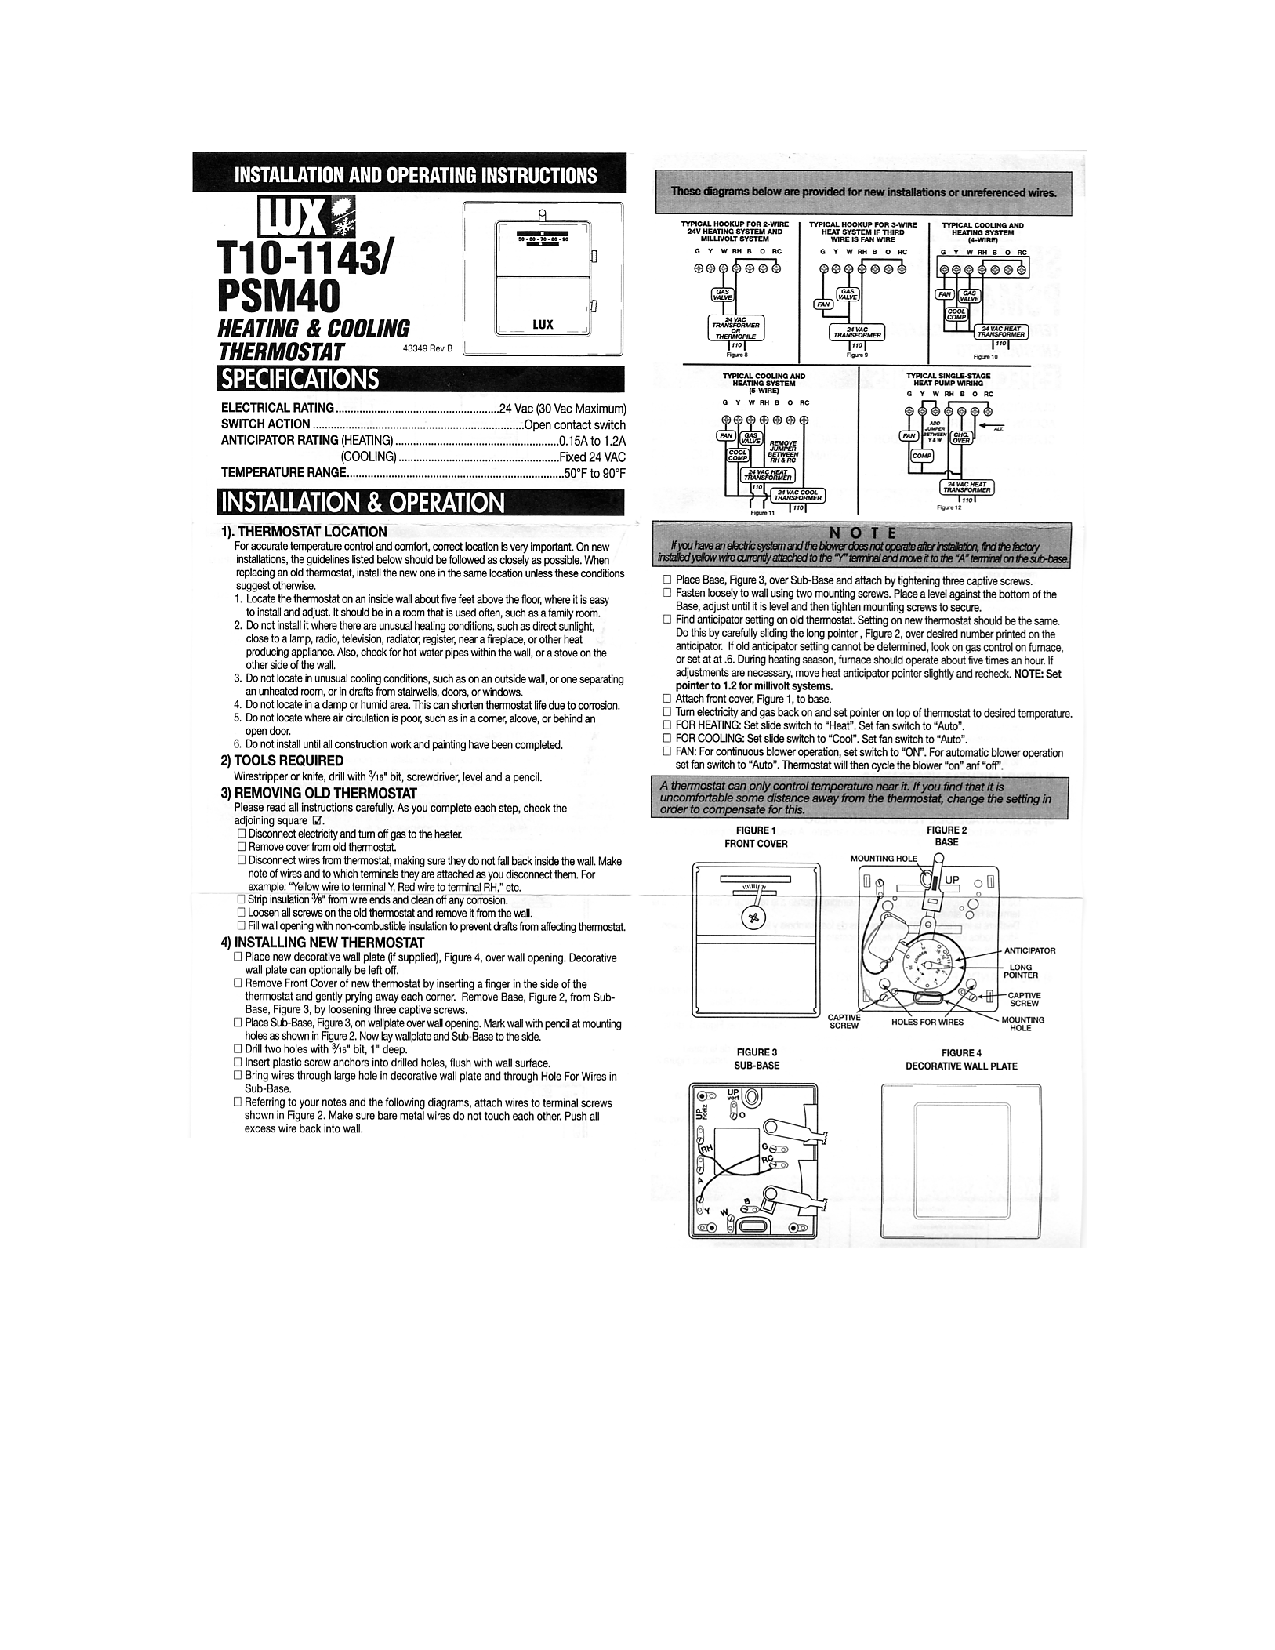 Lux Products T10-1143-PSM40 User Manual